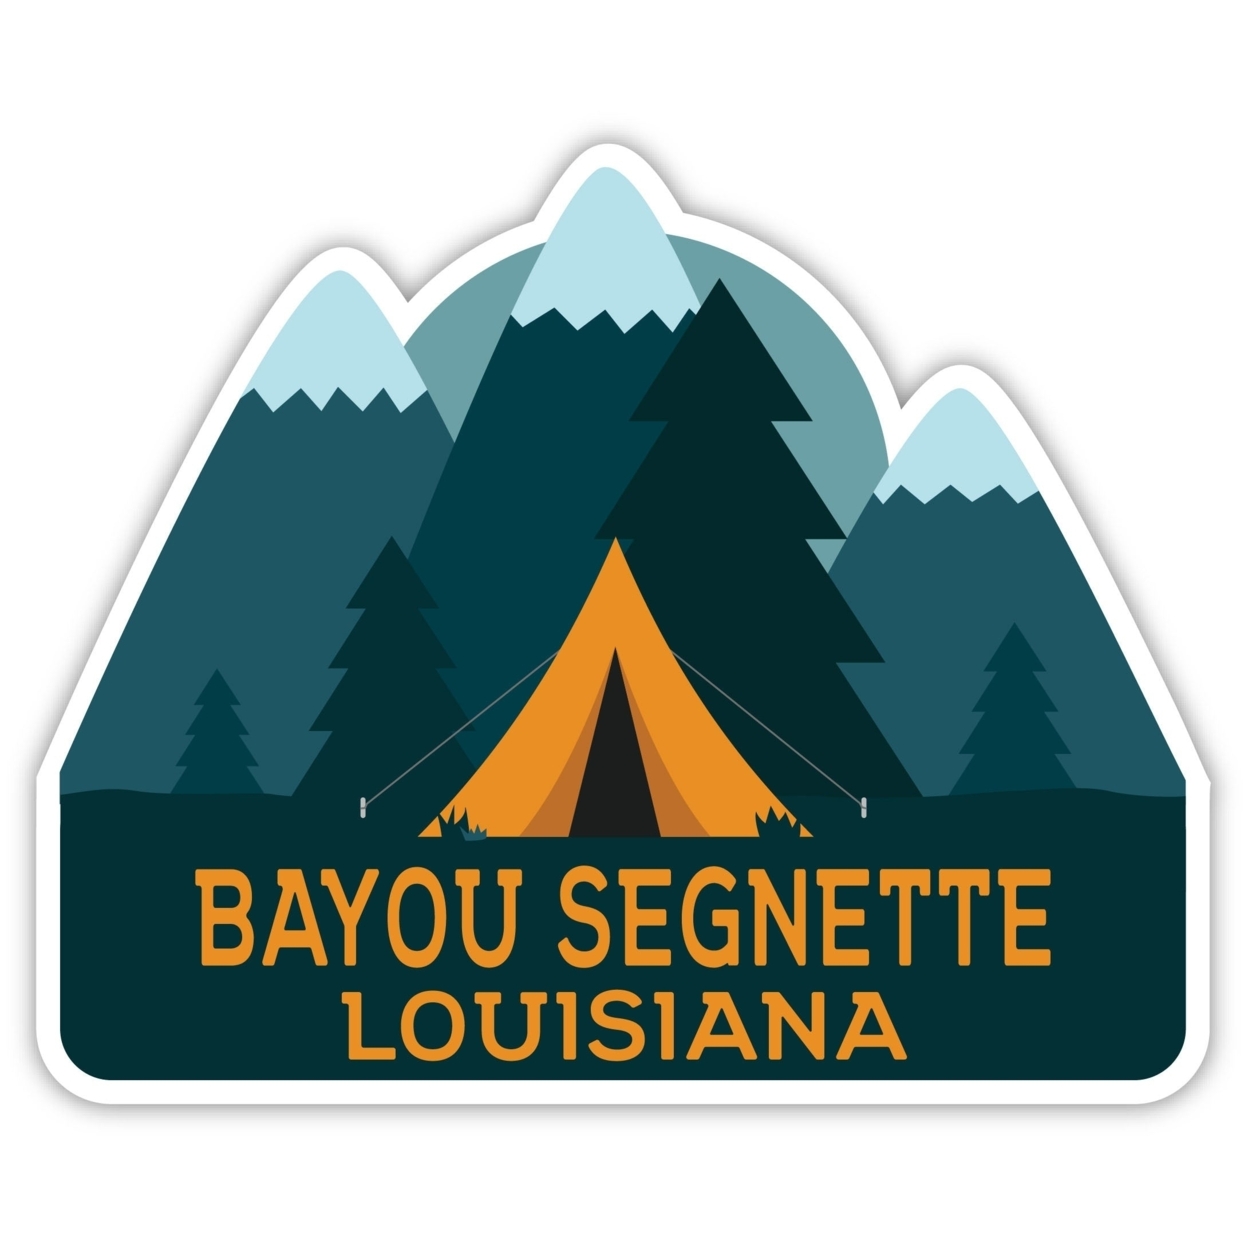 Bayou Segnette Louisiana Souvenir Decorative Stickers (Choose Theme And Size) - 4-Pack, 8-Inch, Tent